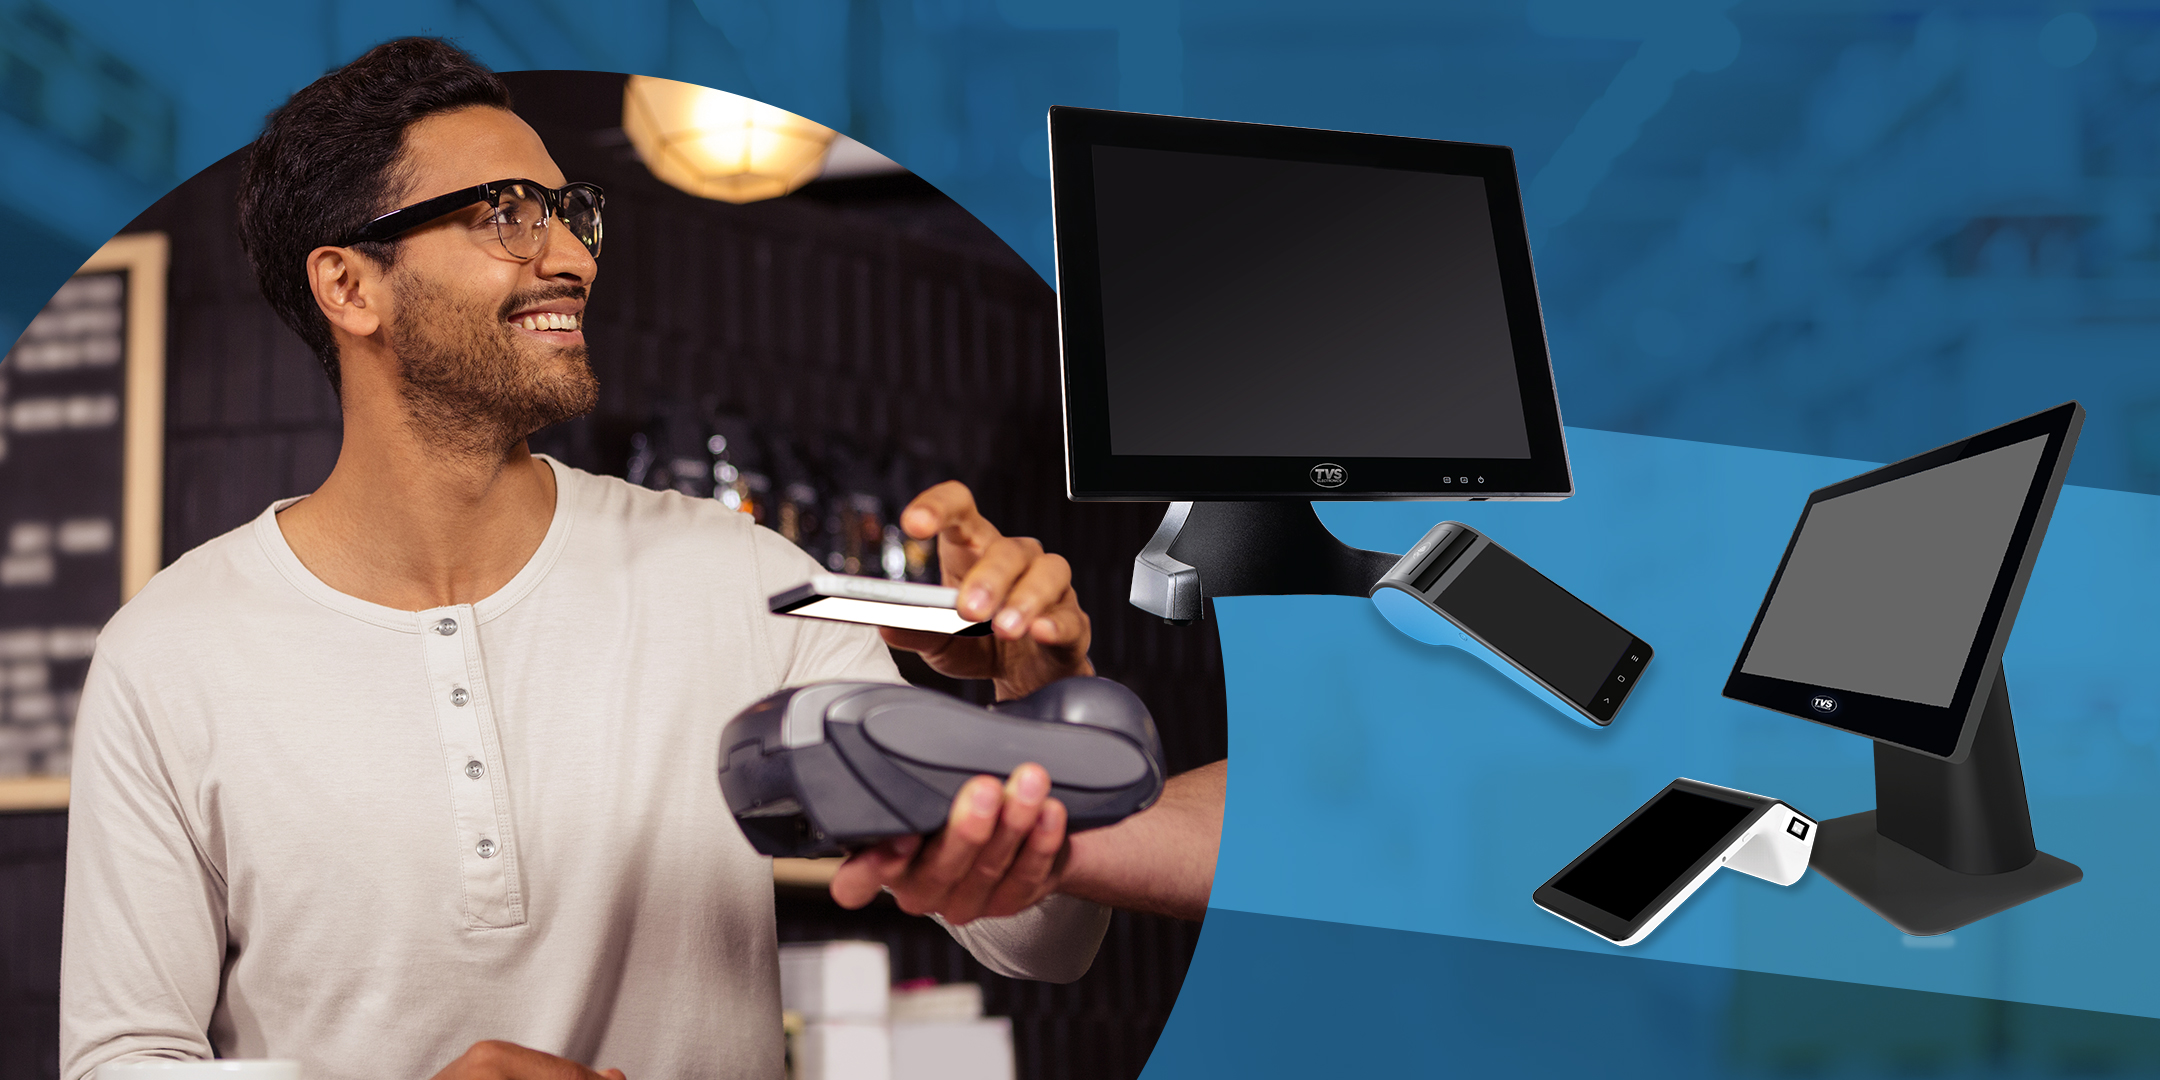 Understanding the ROI of POS systems in your retail store